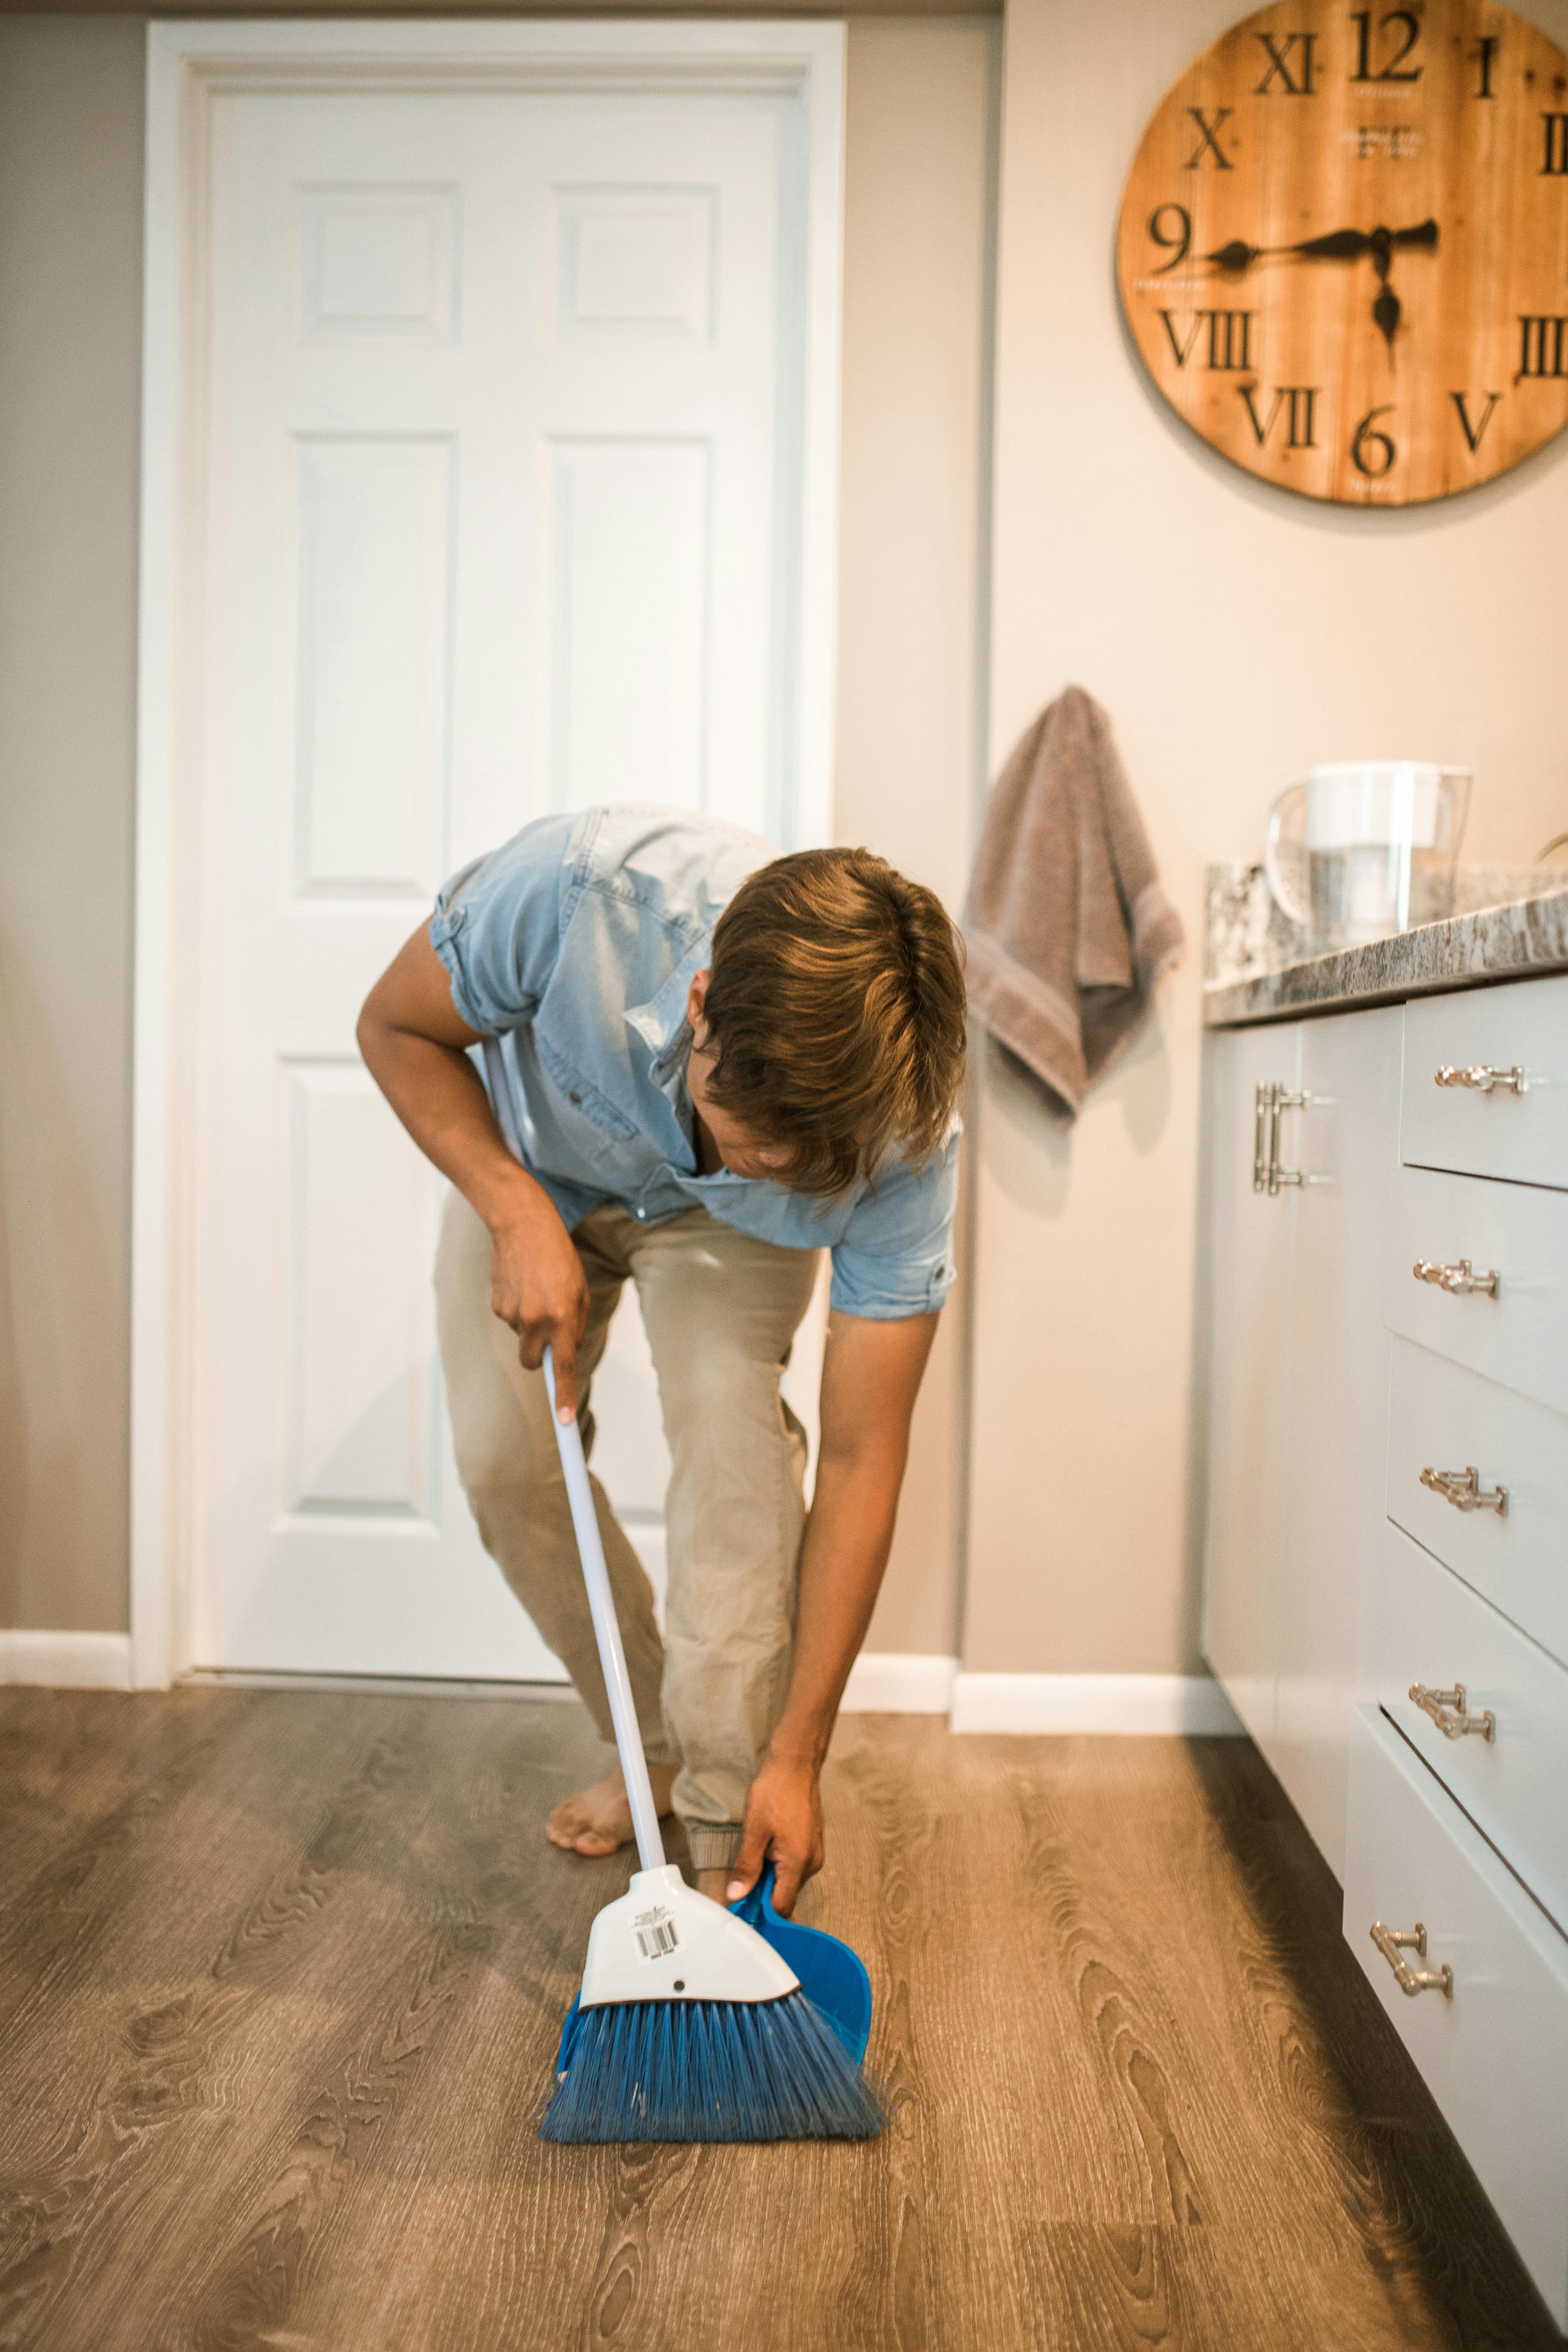 Lisa and James clean up the house together | Source: Pexels